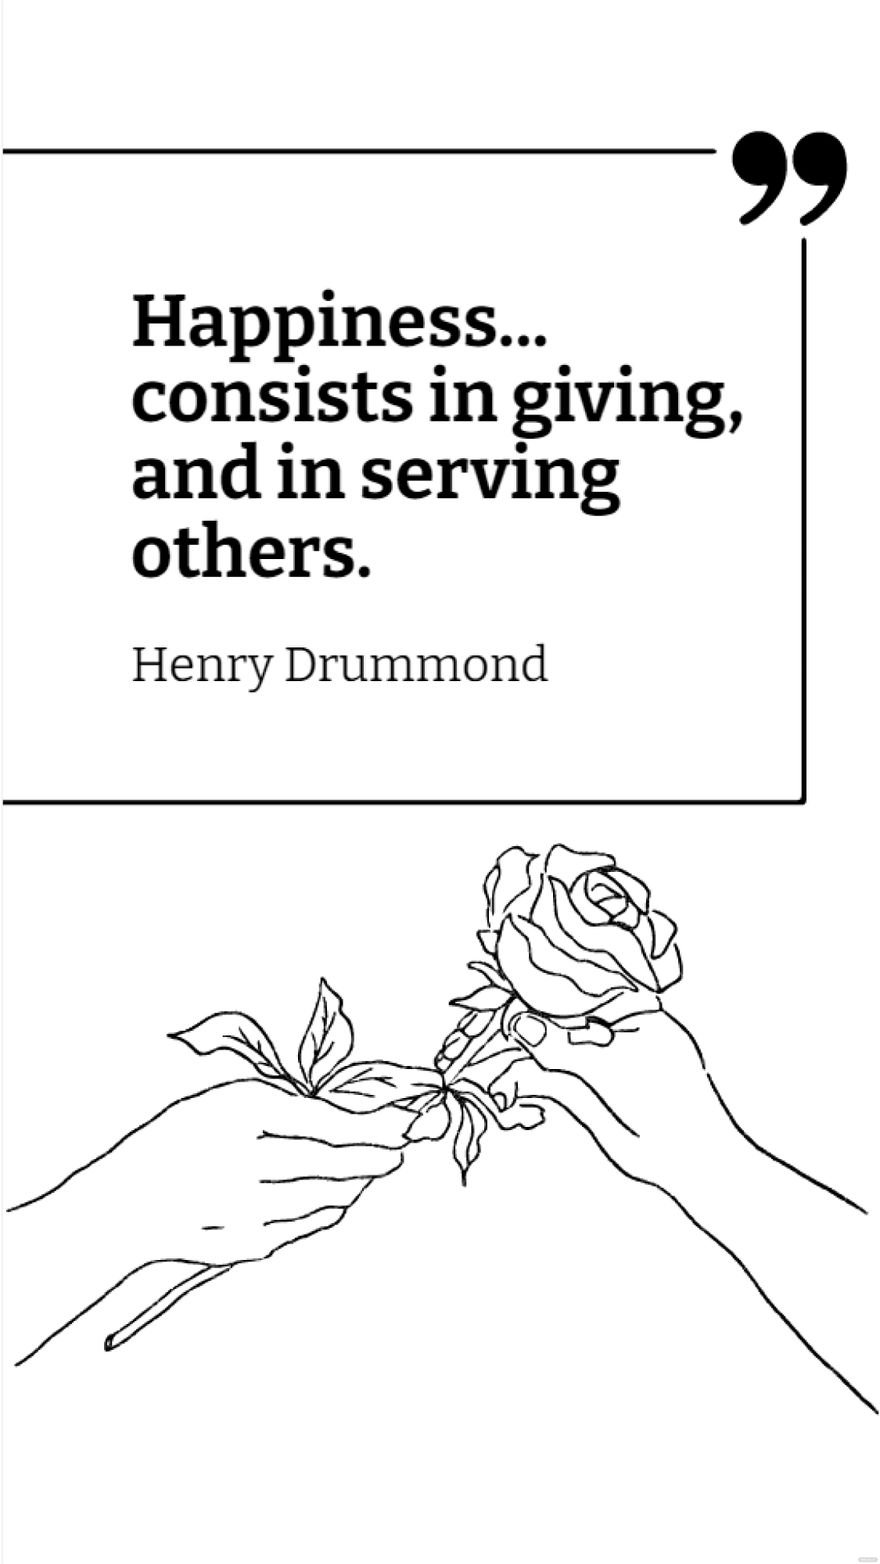 Henry Drummond - Happiness... consists in giving, and in serving others.